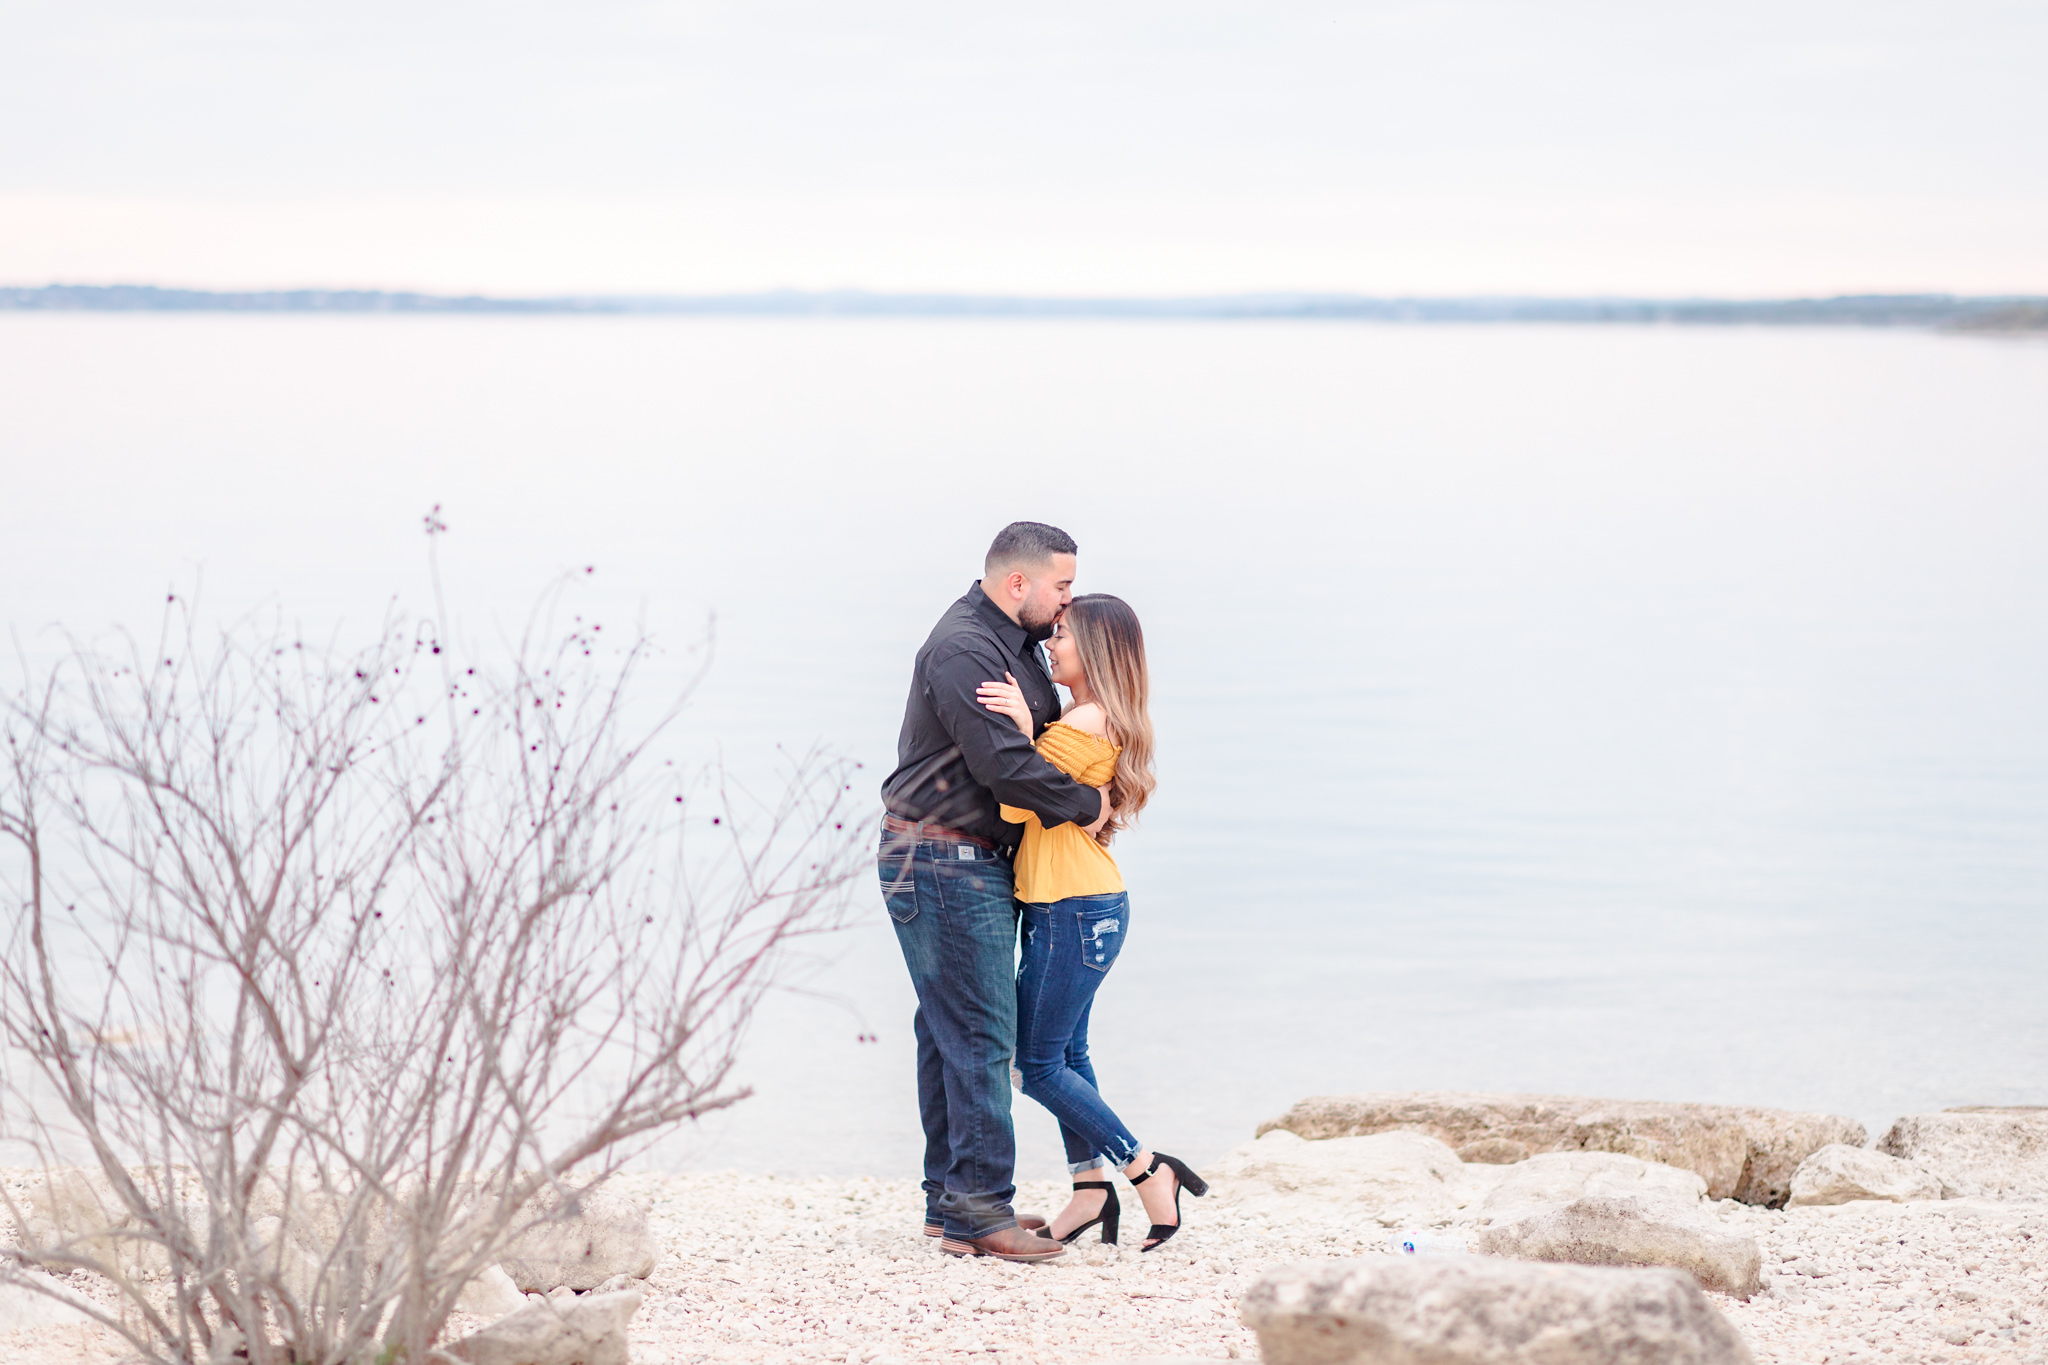 An Engagement Session at Overlook Park in Canyon Lake, TX by Dawn Elizabeth Studios, San Antonio Wedding Photographer